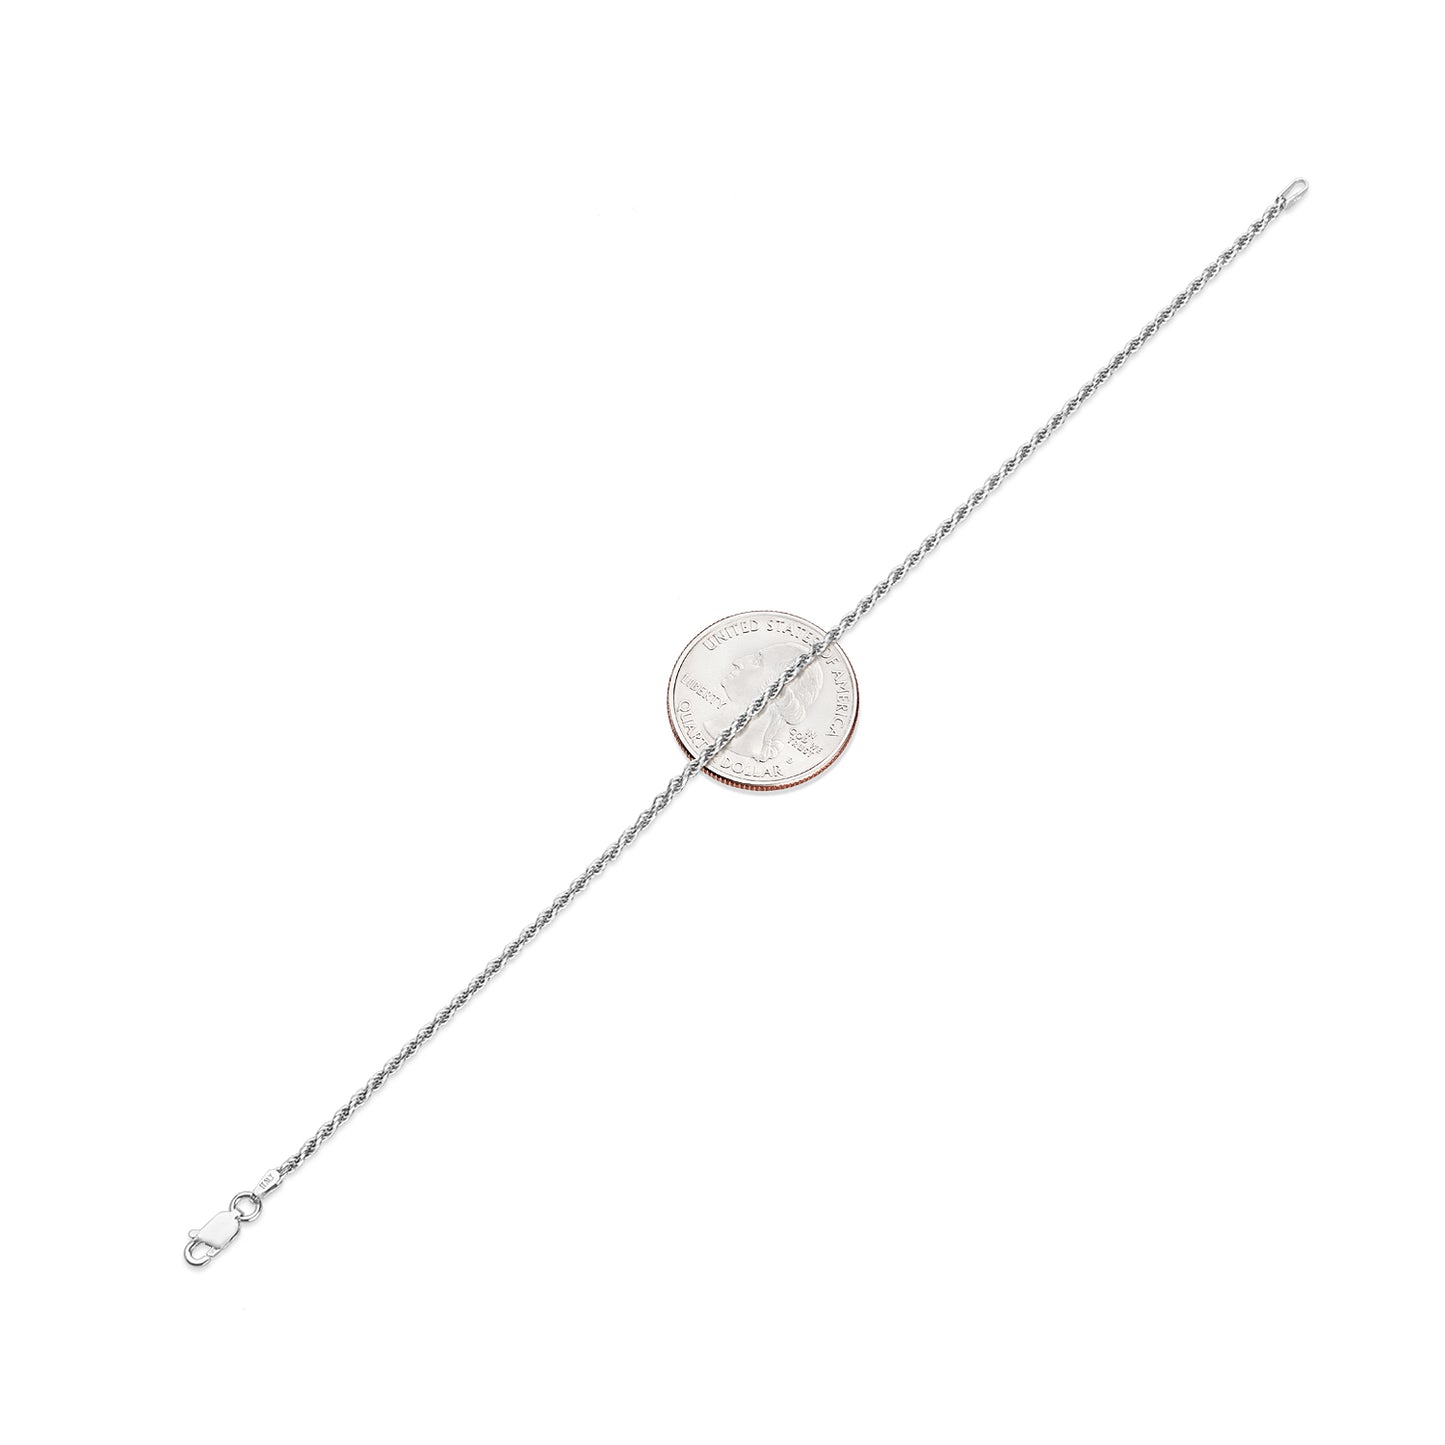 2mm-3mm Solid .925 Sterling Silver Diamond-Cut Twisted Rope Chain Anklet 9 -10" Made in Italy (SKU: ROPE-ANKLETS-GIRLS)